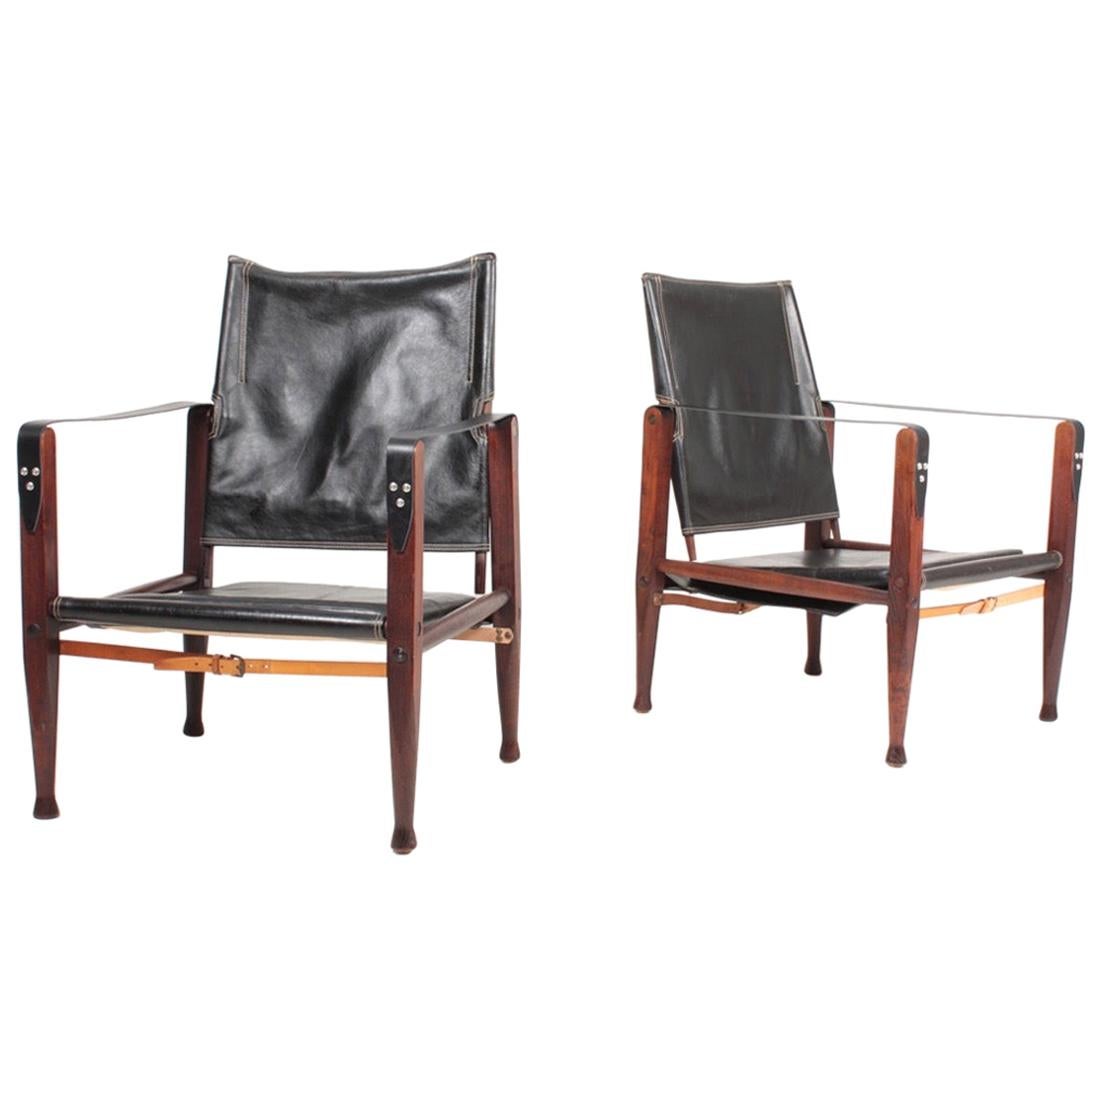 Pair of Midcentury Danish Design Lounge Chairs in Patianted Leather by Klint